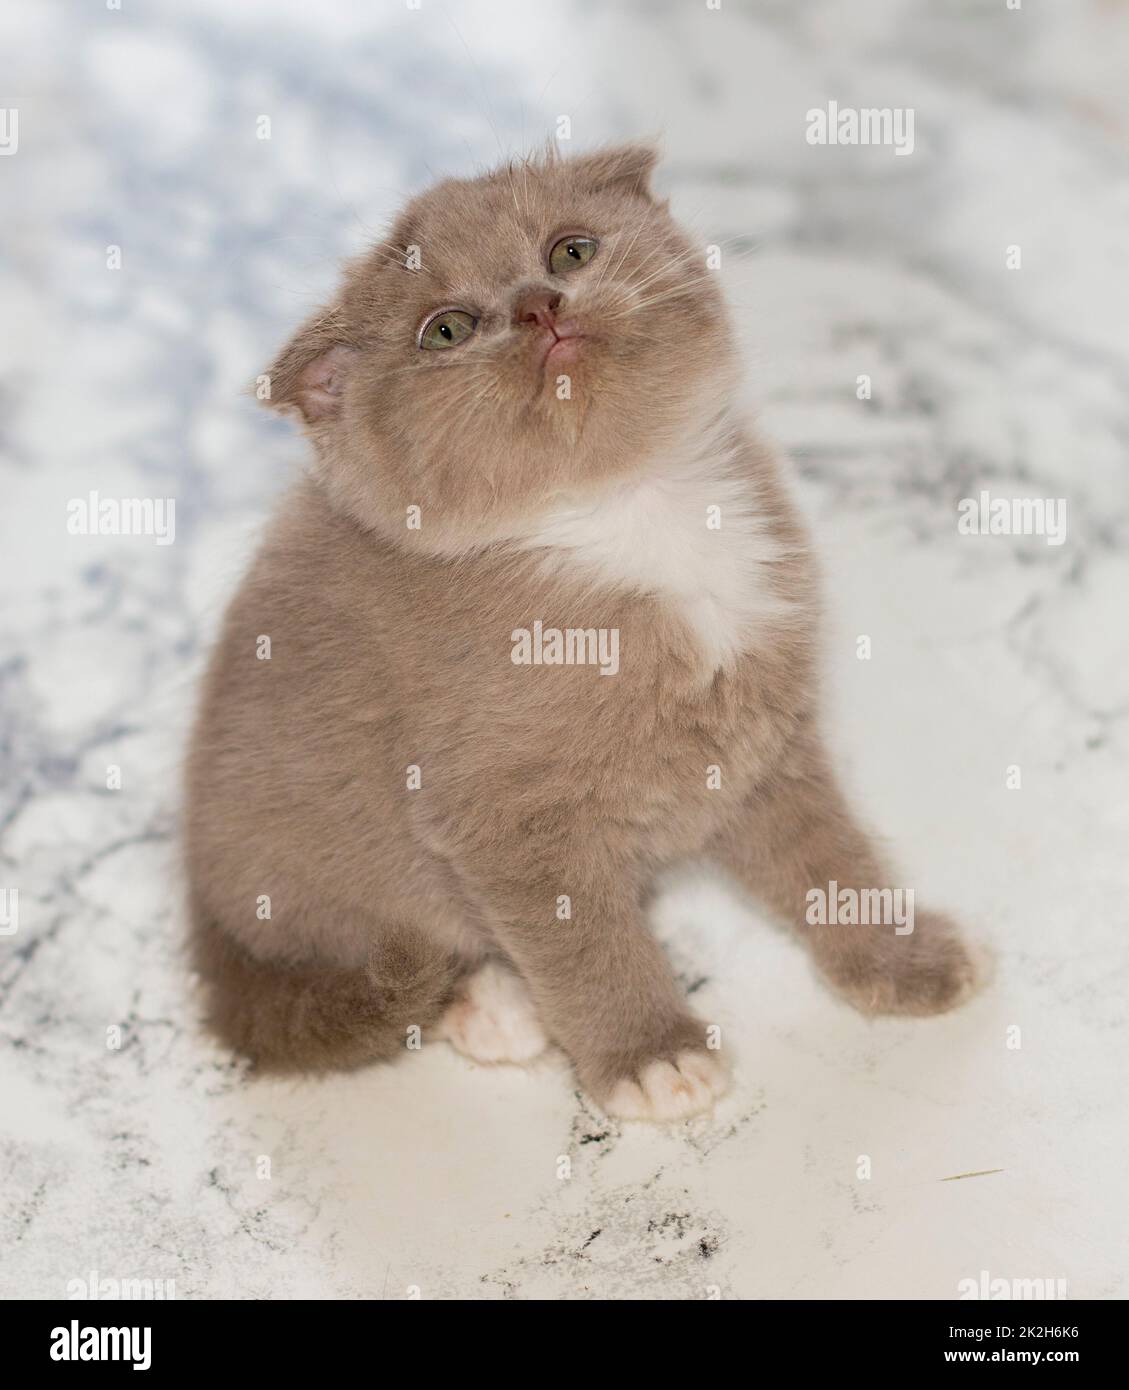 close-up Scottish lilac kitten sitting on a marble background Stock Photo